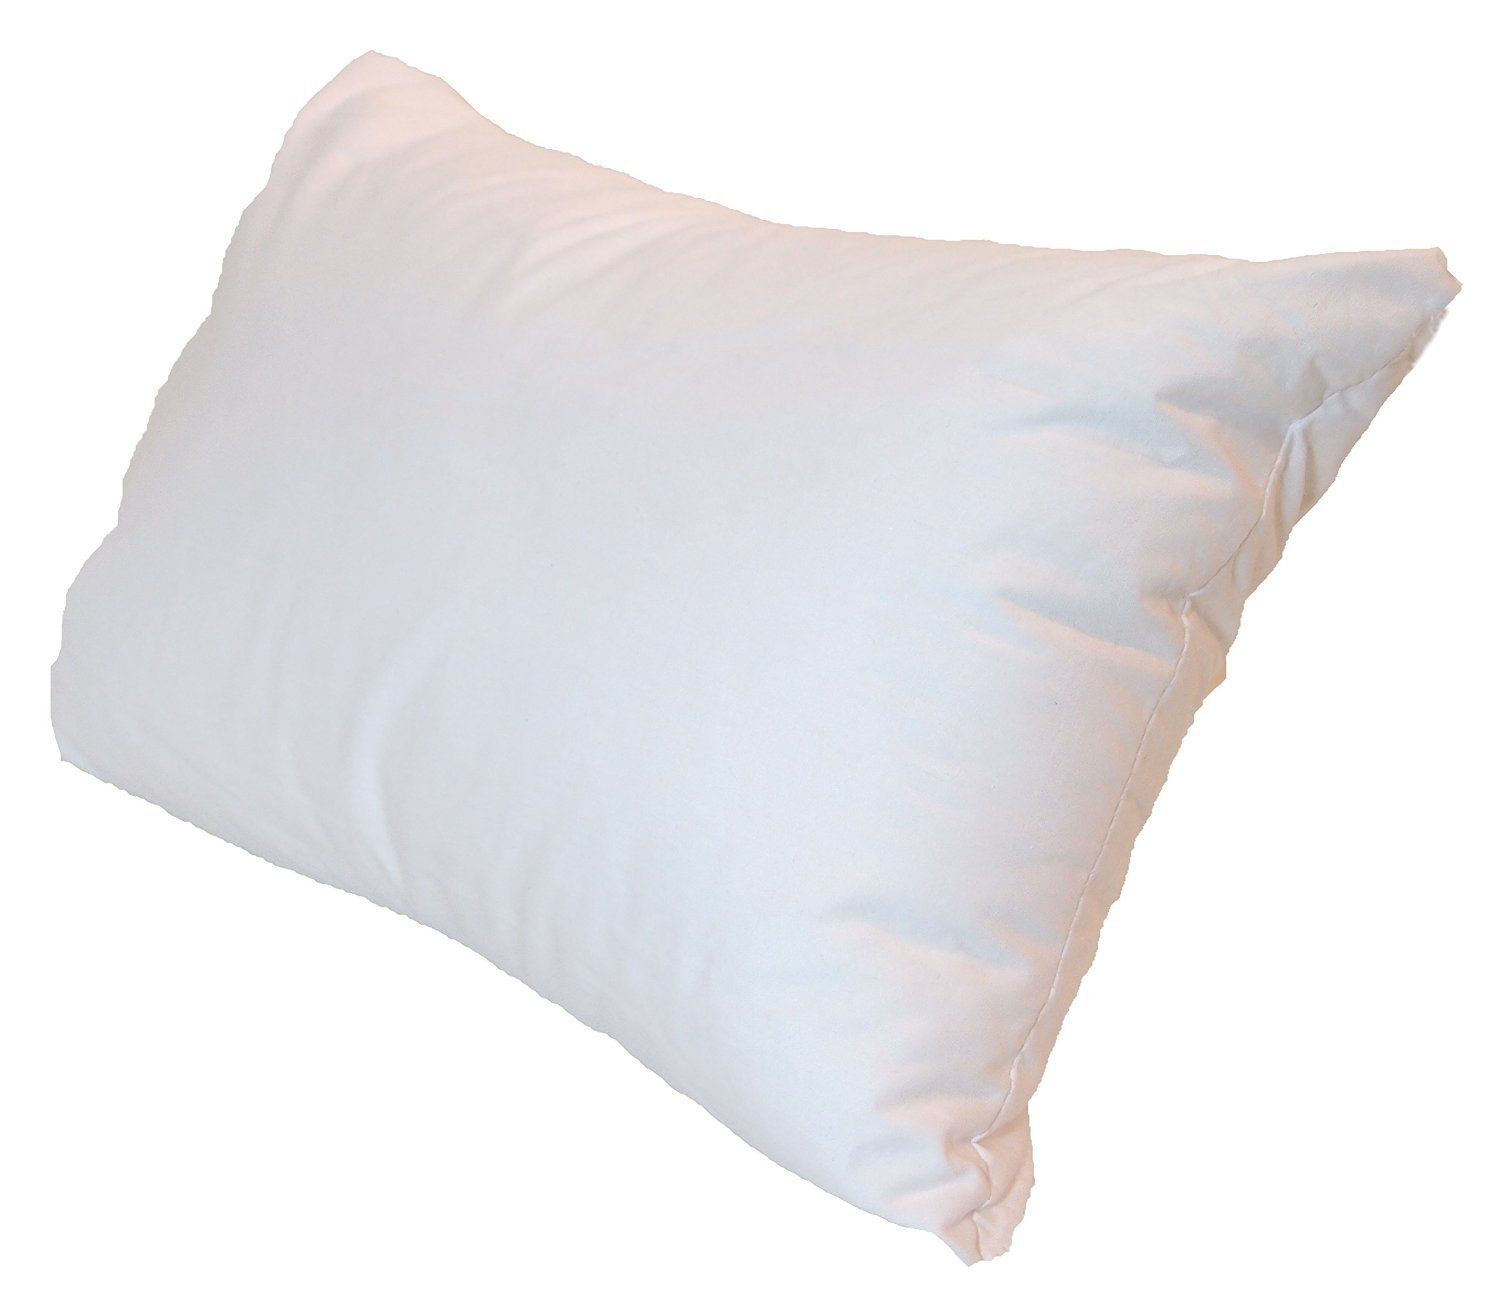 18 x 18 Pillow Inserts Form- Square – with PREMIUM polyester filling